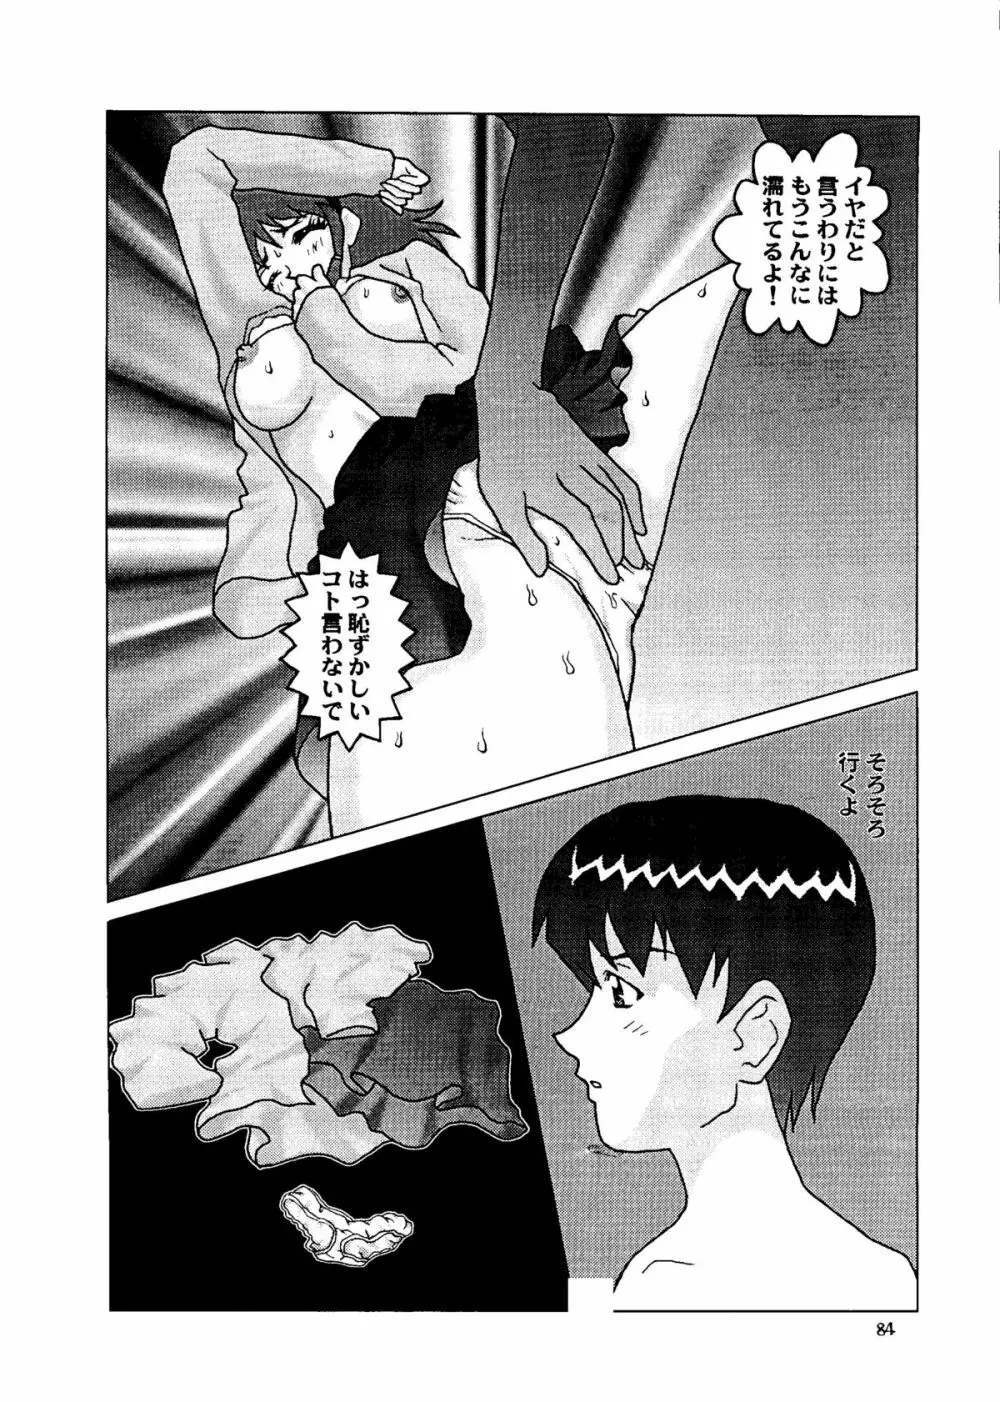 BUY or DIE おかちめんたいこ Page.84